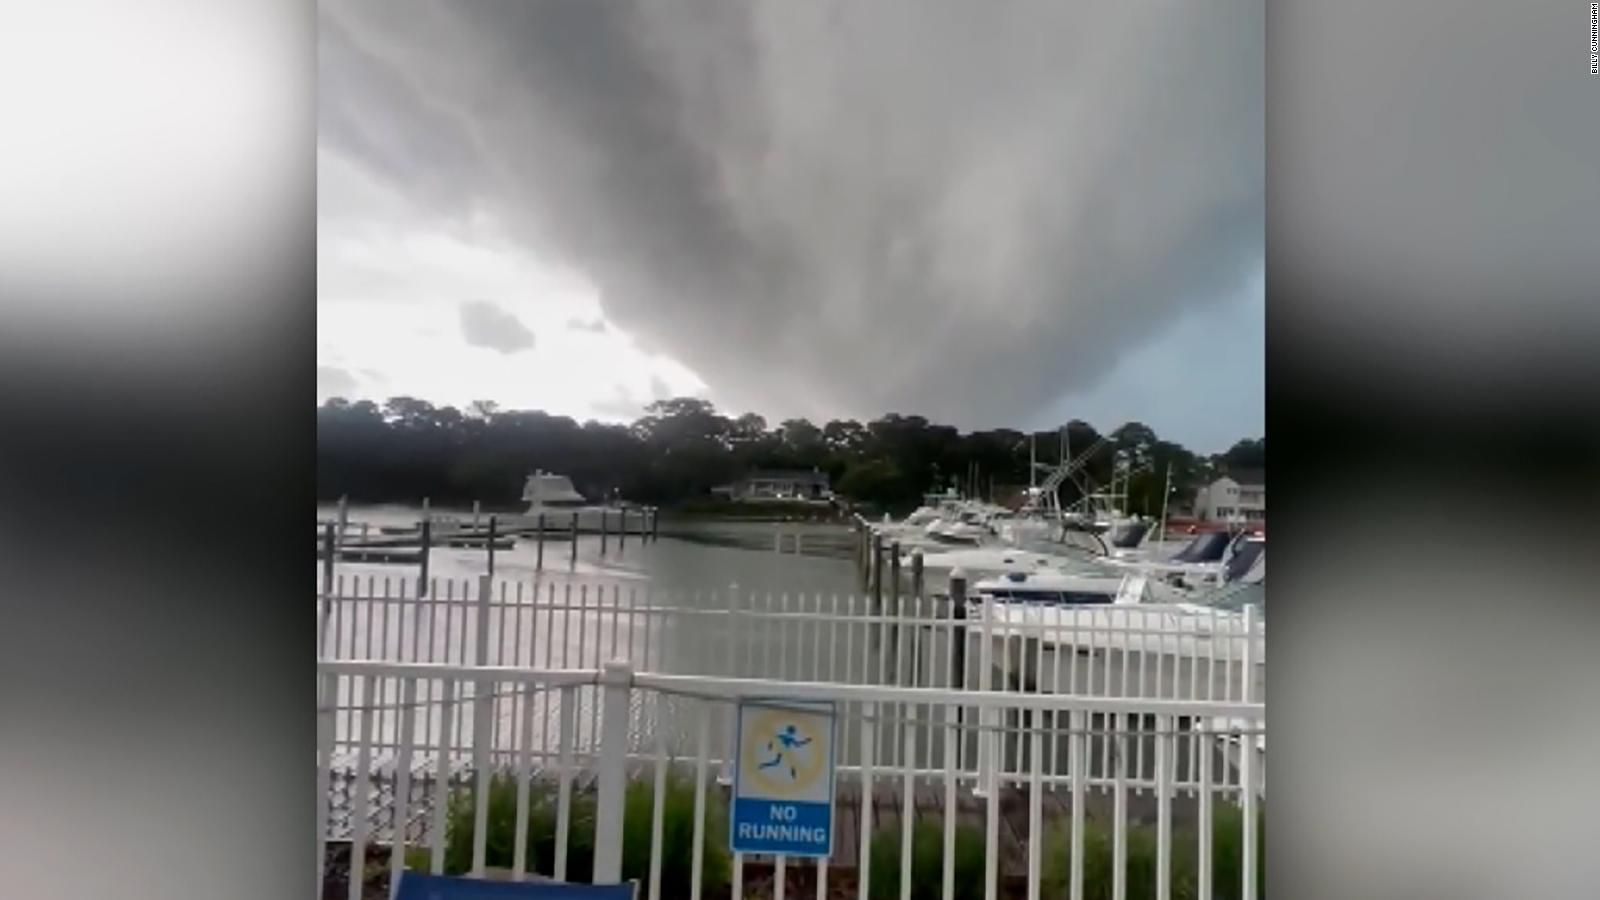 Virginia Beach tornado Up to 100 homes damaged and schools closed